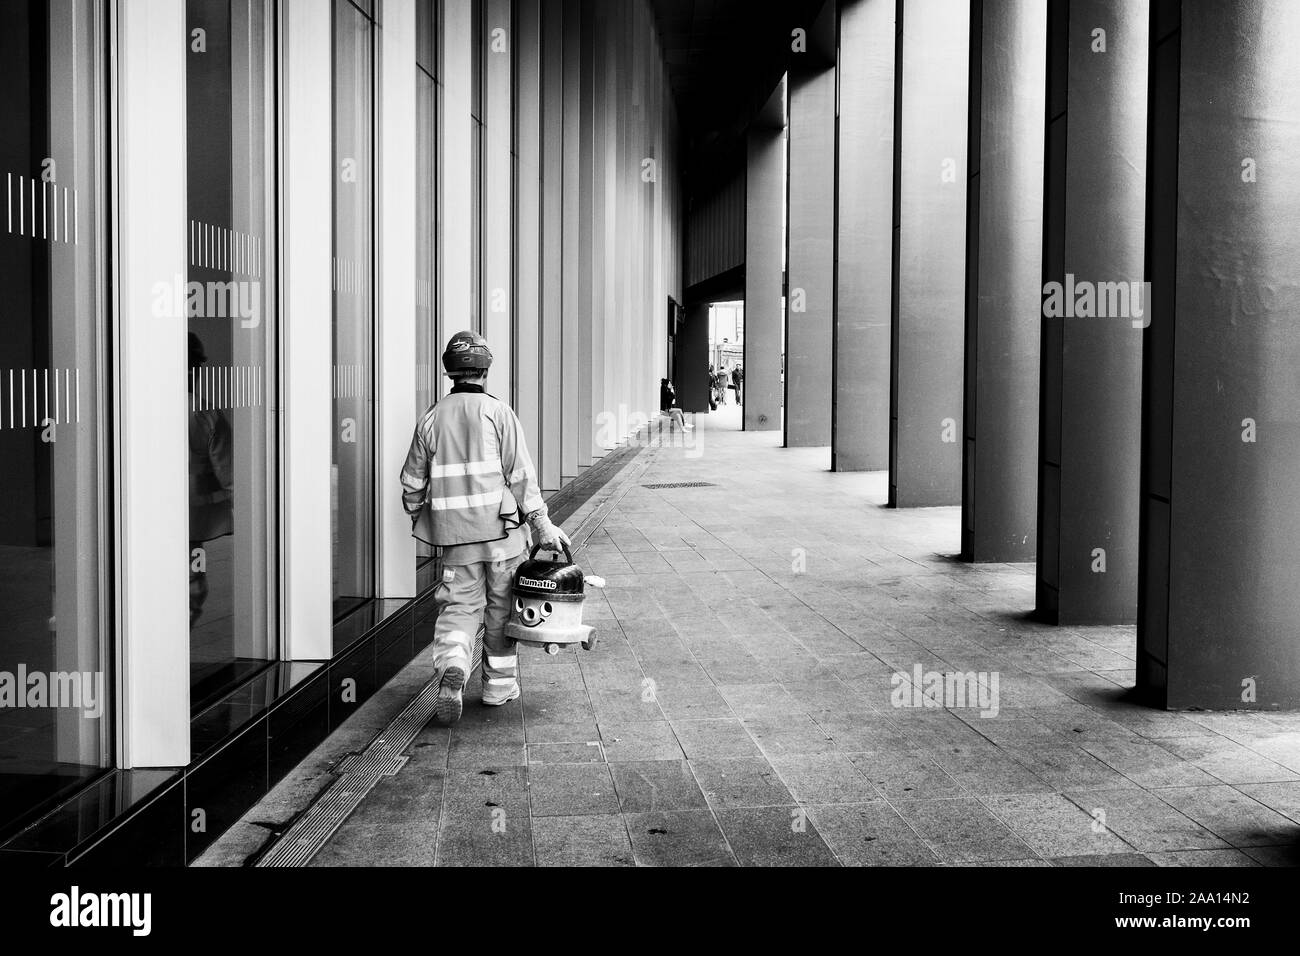 London black and white street photography: Workman carrying Numatic 'Henry' vacuum cleaner in street. Stock Photo